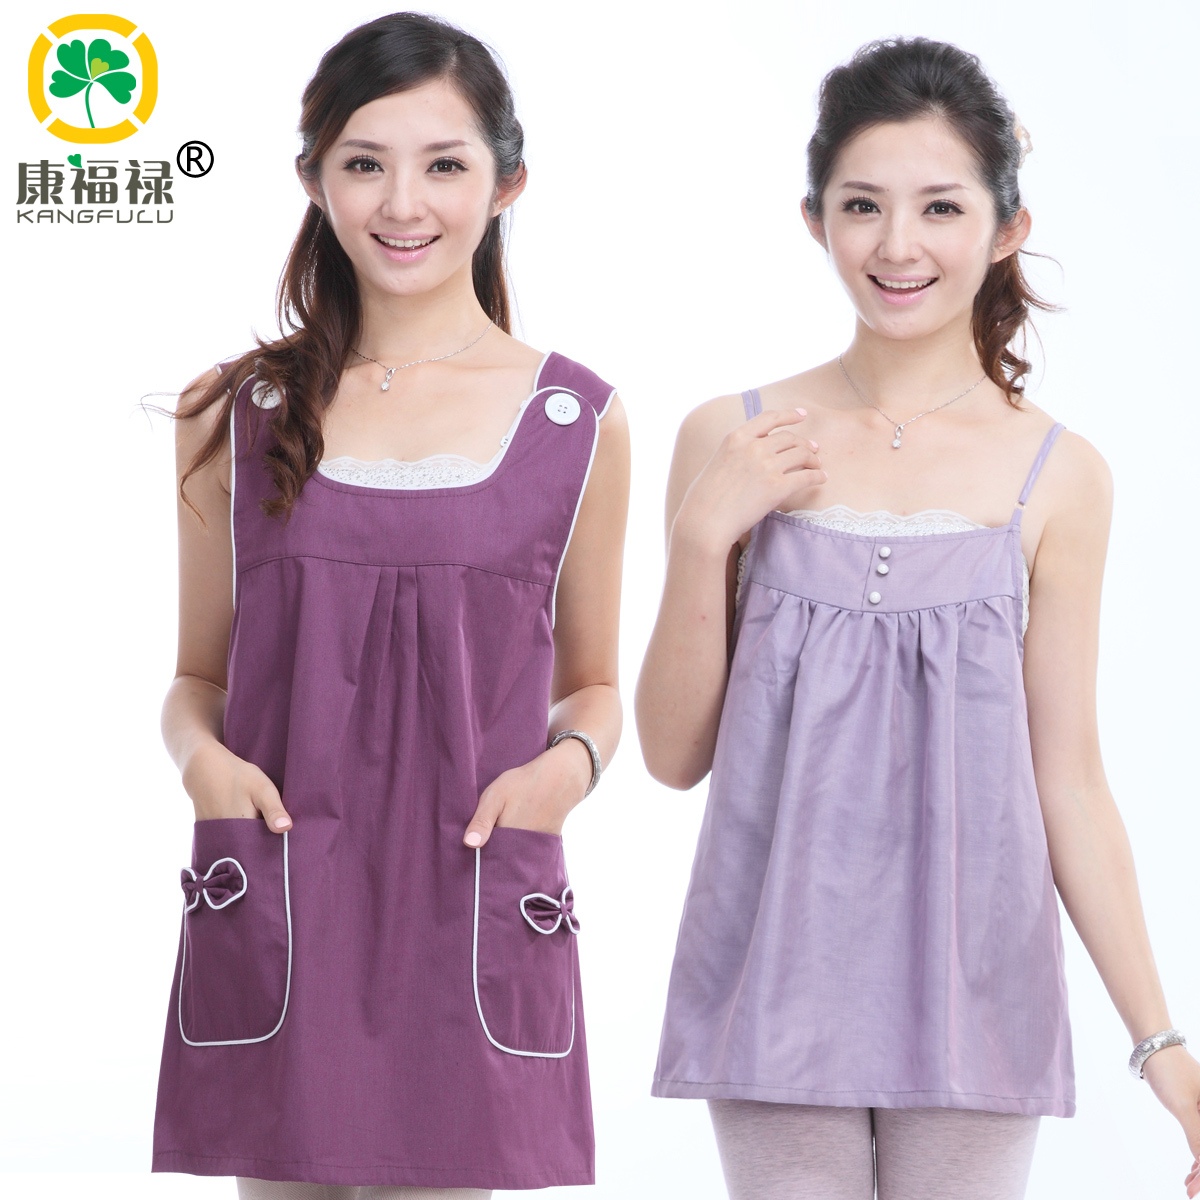 Maternity radiation-resistant clothes silver fiber radiation-resistant maternity clothing clothes 301y205